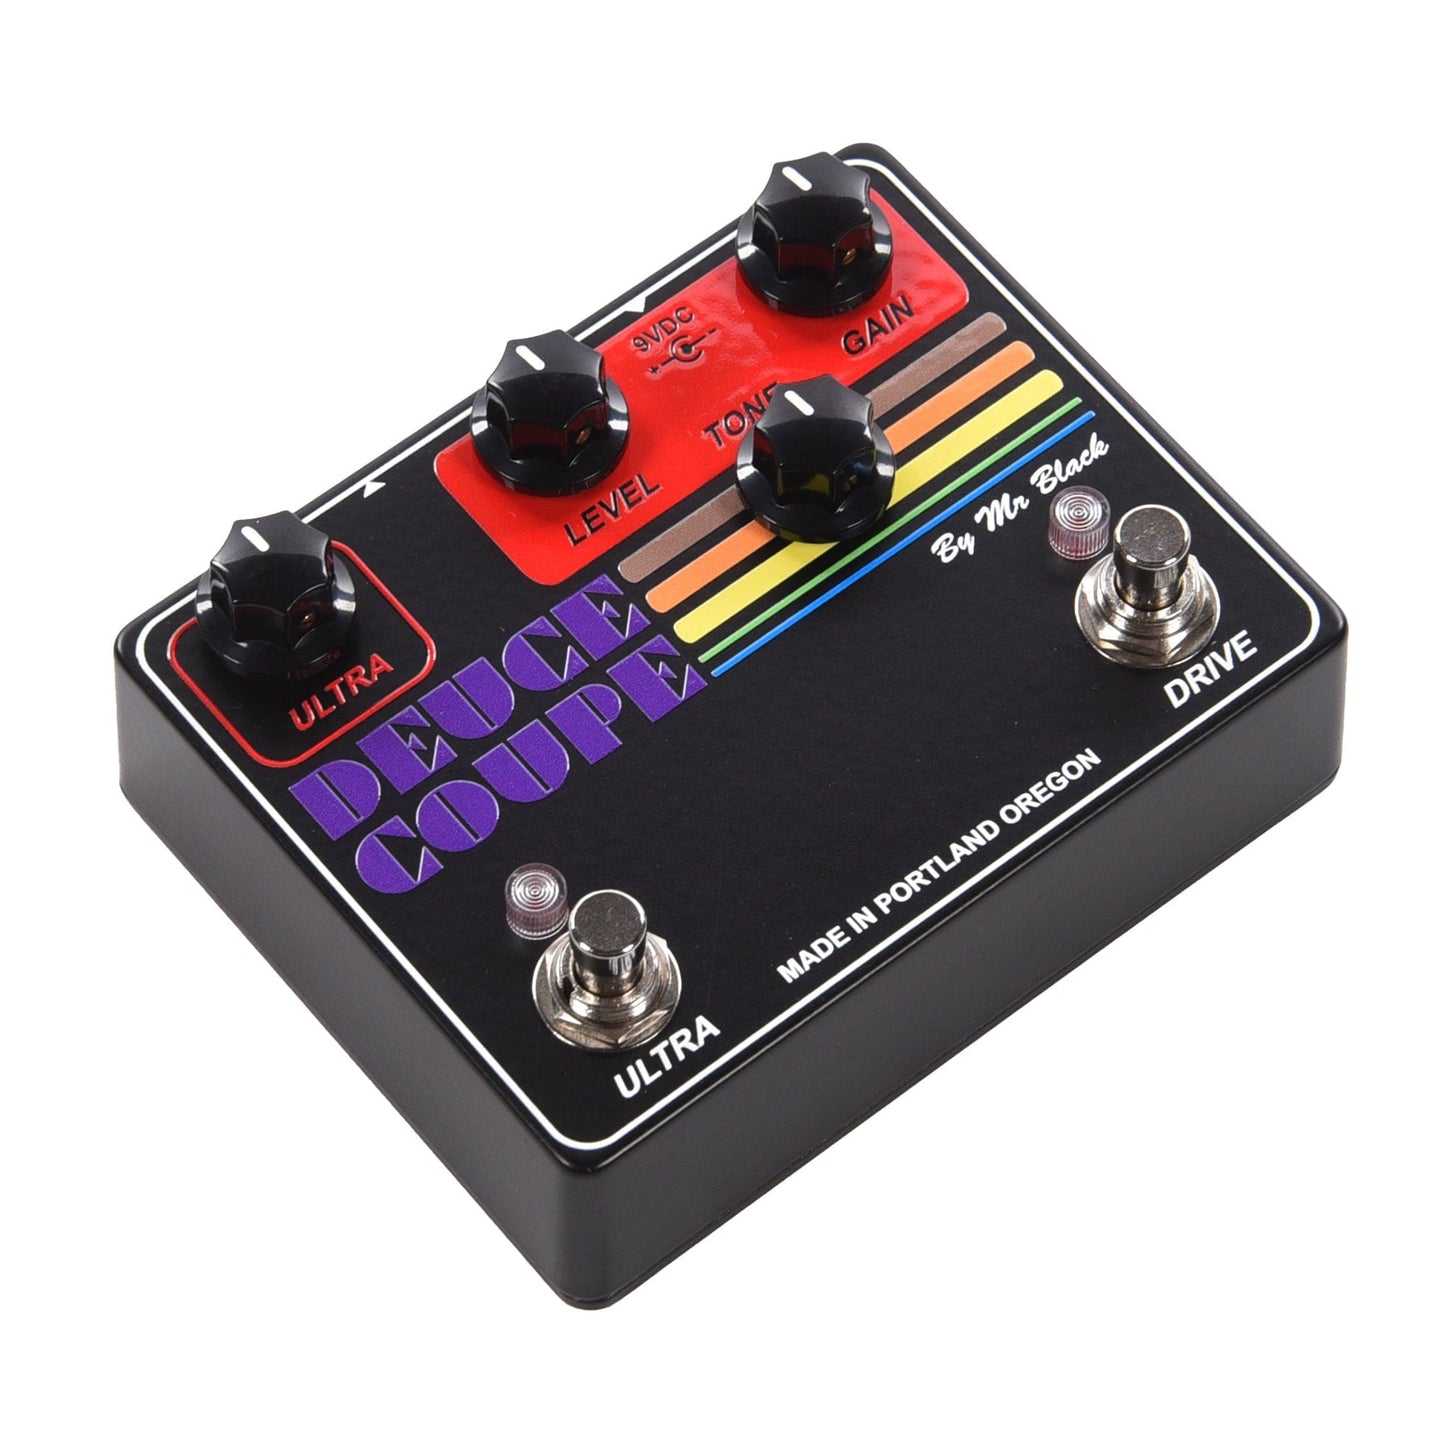 Mr. Black Deuce Coupe Dual Mode Overdrive Pedal Effects and Pedals / Overdrive and Boost